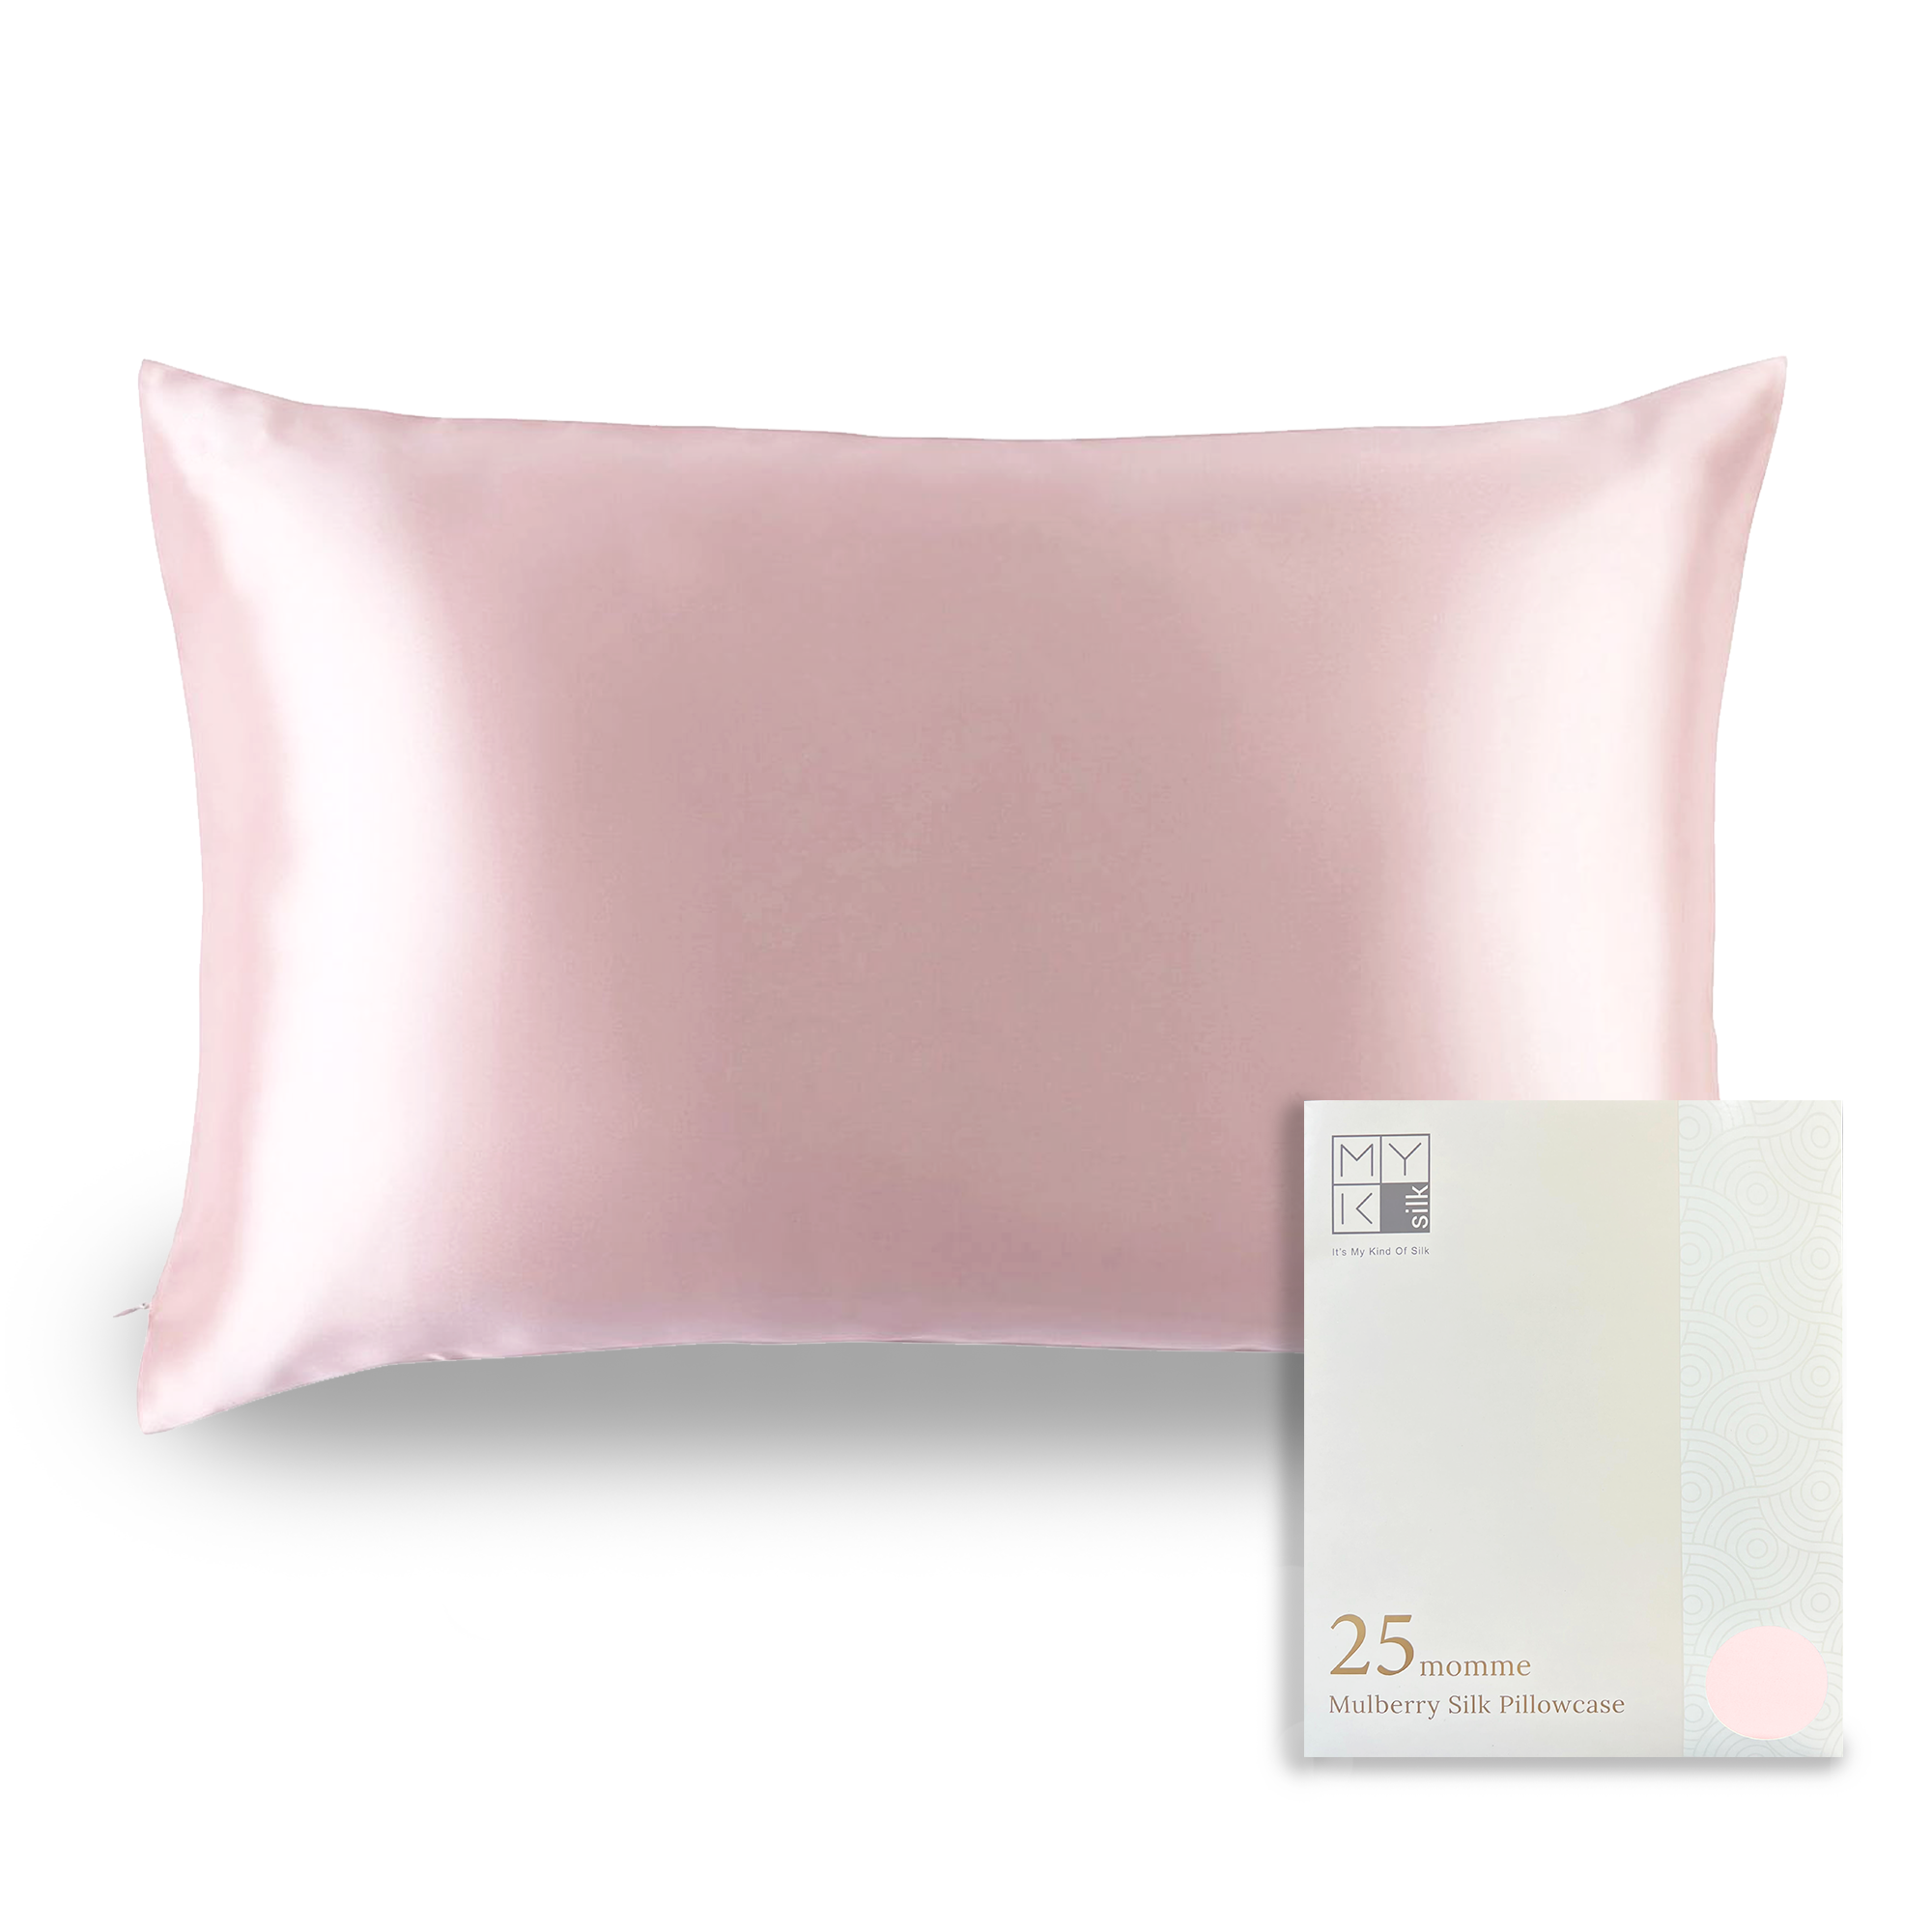 Products Luxury Mulberry Silk Pillowcase (25 momme) - MYK Silk #color_pink